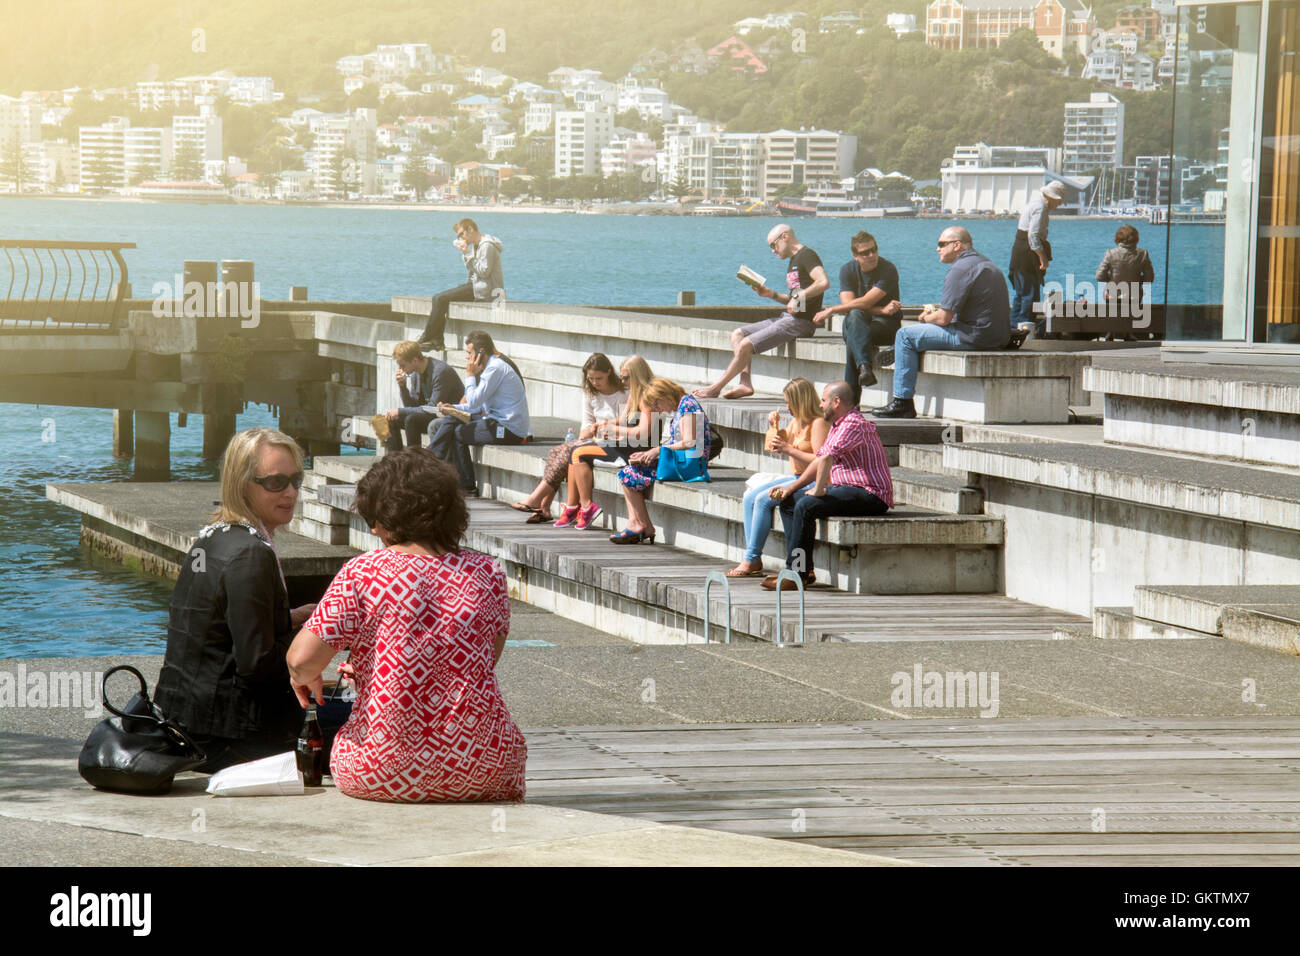 Wellington, New Zealand - March 3, 2016: People at Wellington waterfront, north island of New Zealand Stock Photo